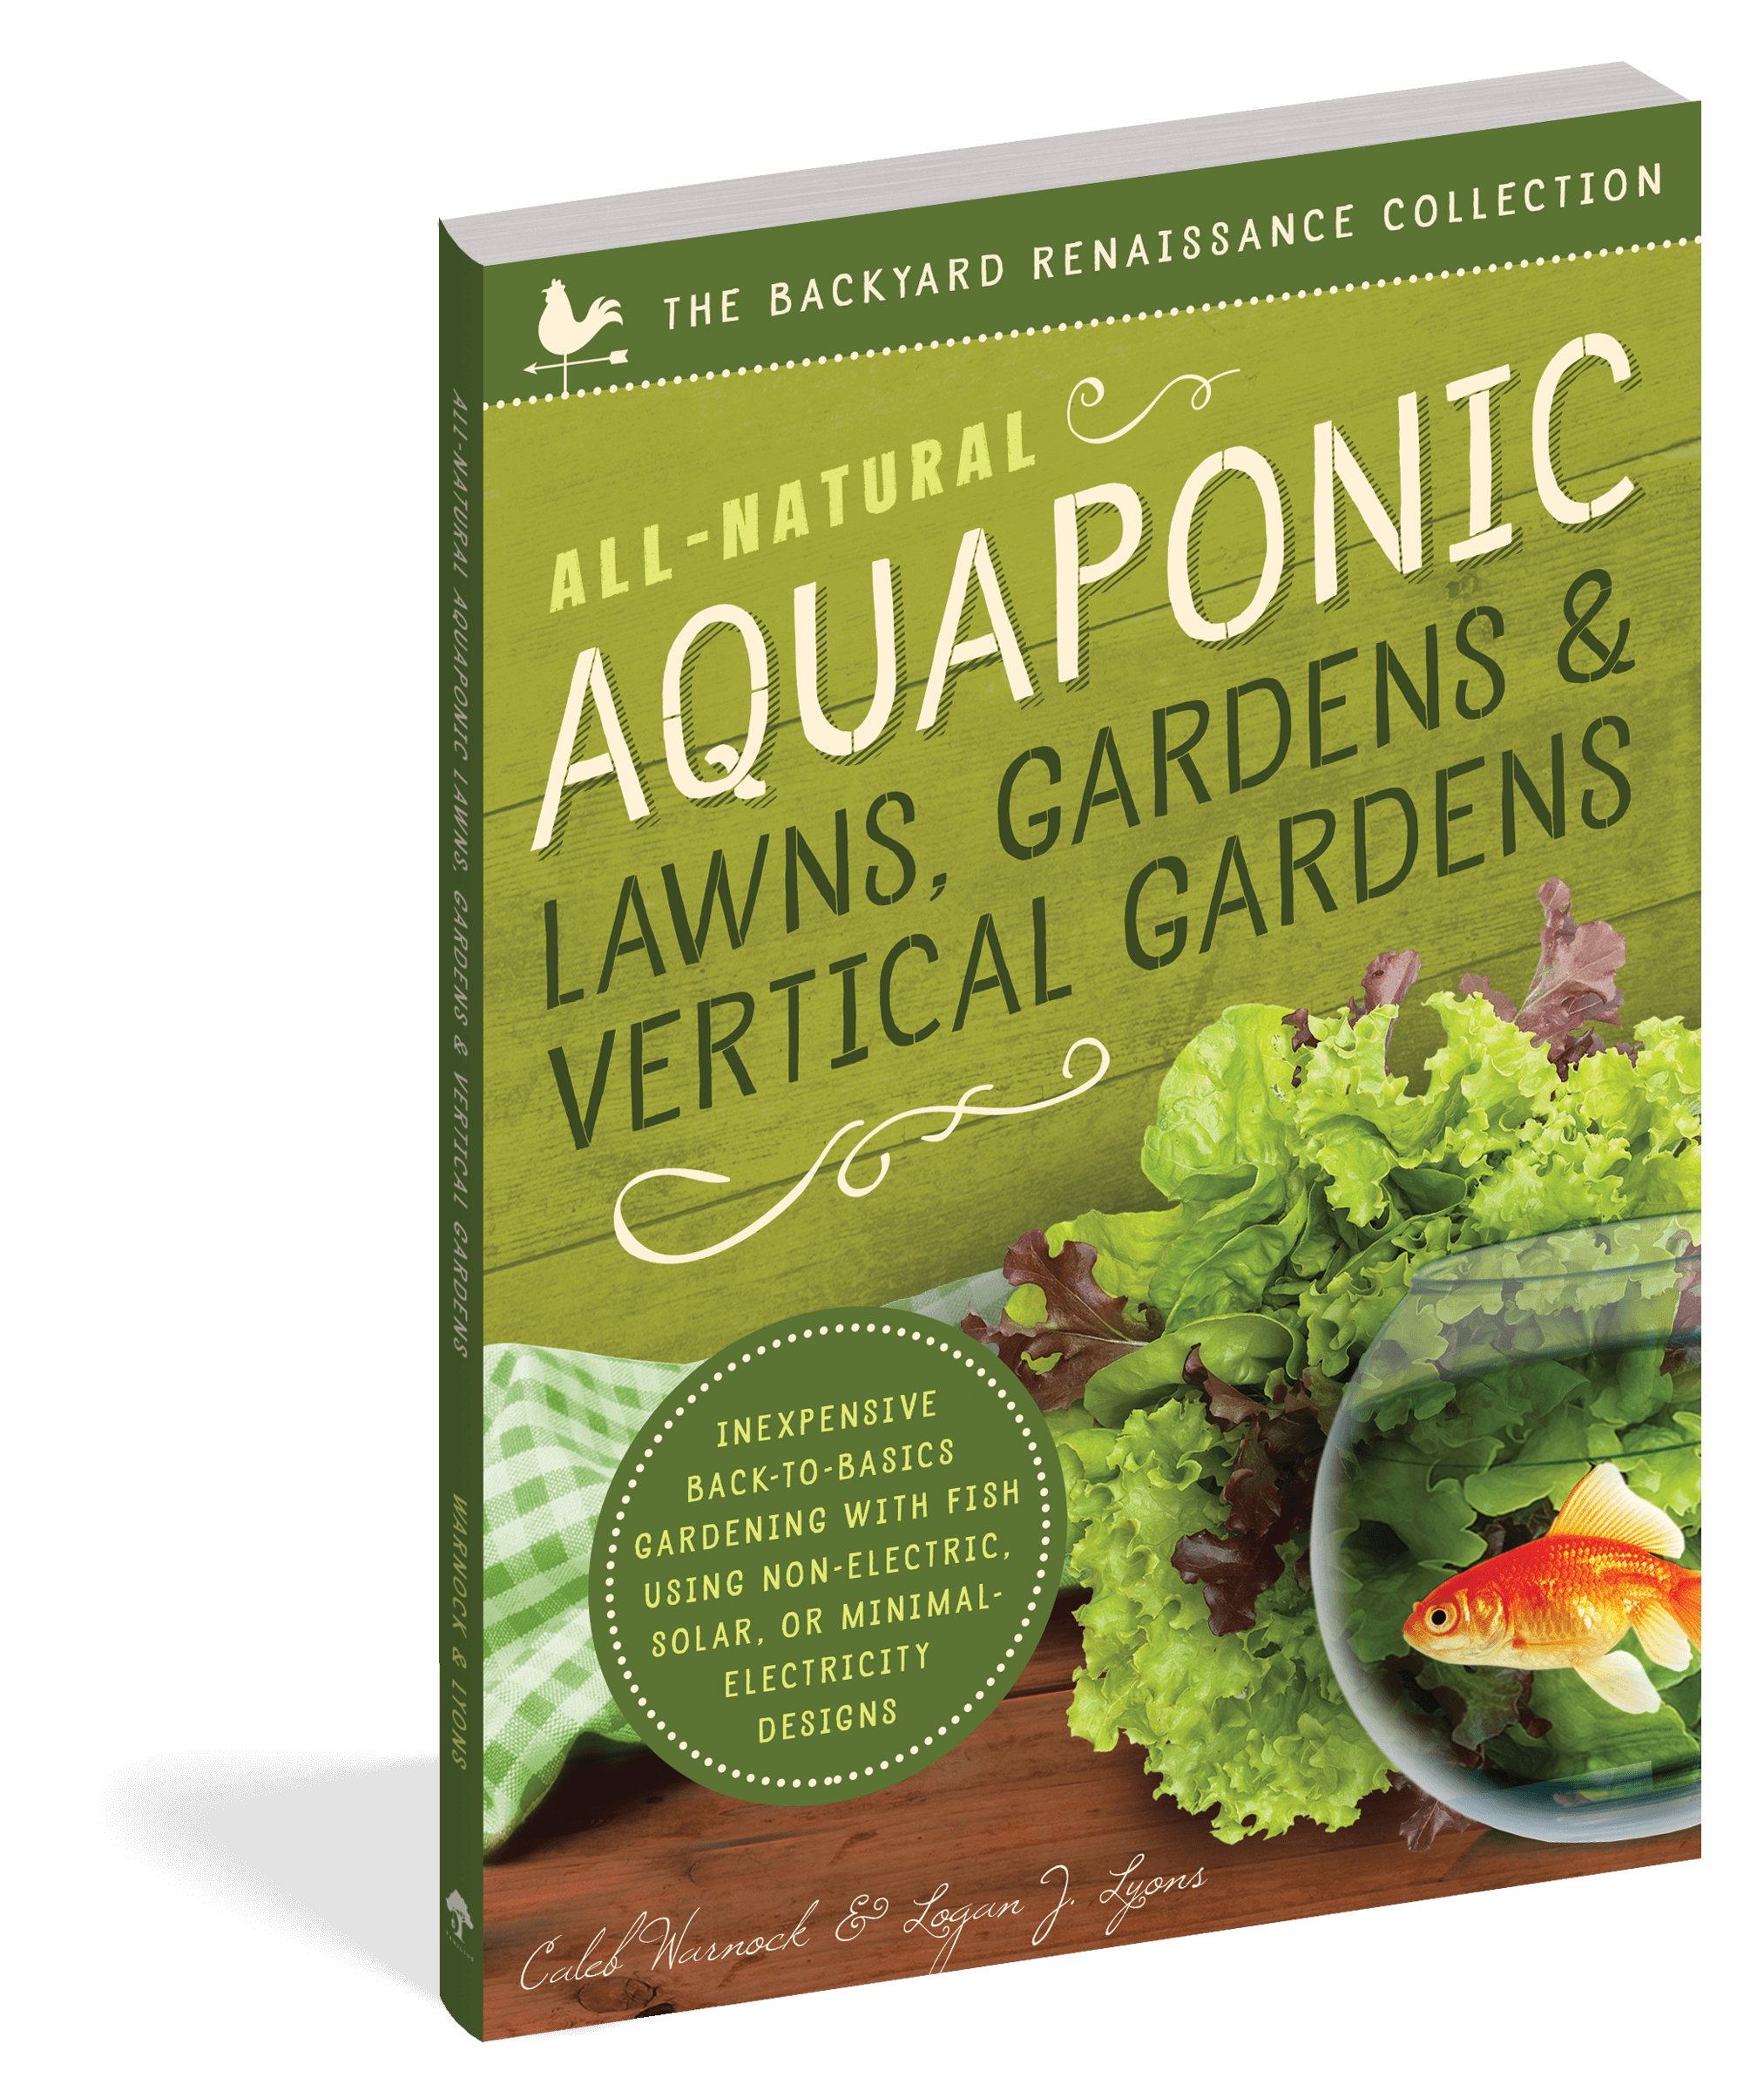 The cover of the book All-Natural Aquaponic Lawns, Gardens, and Vertical Gardens.